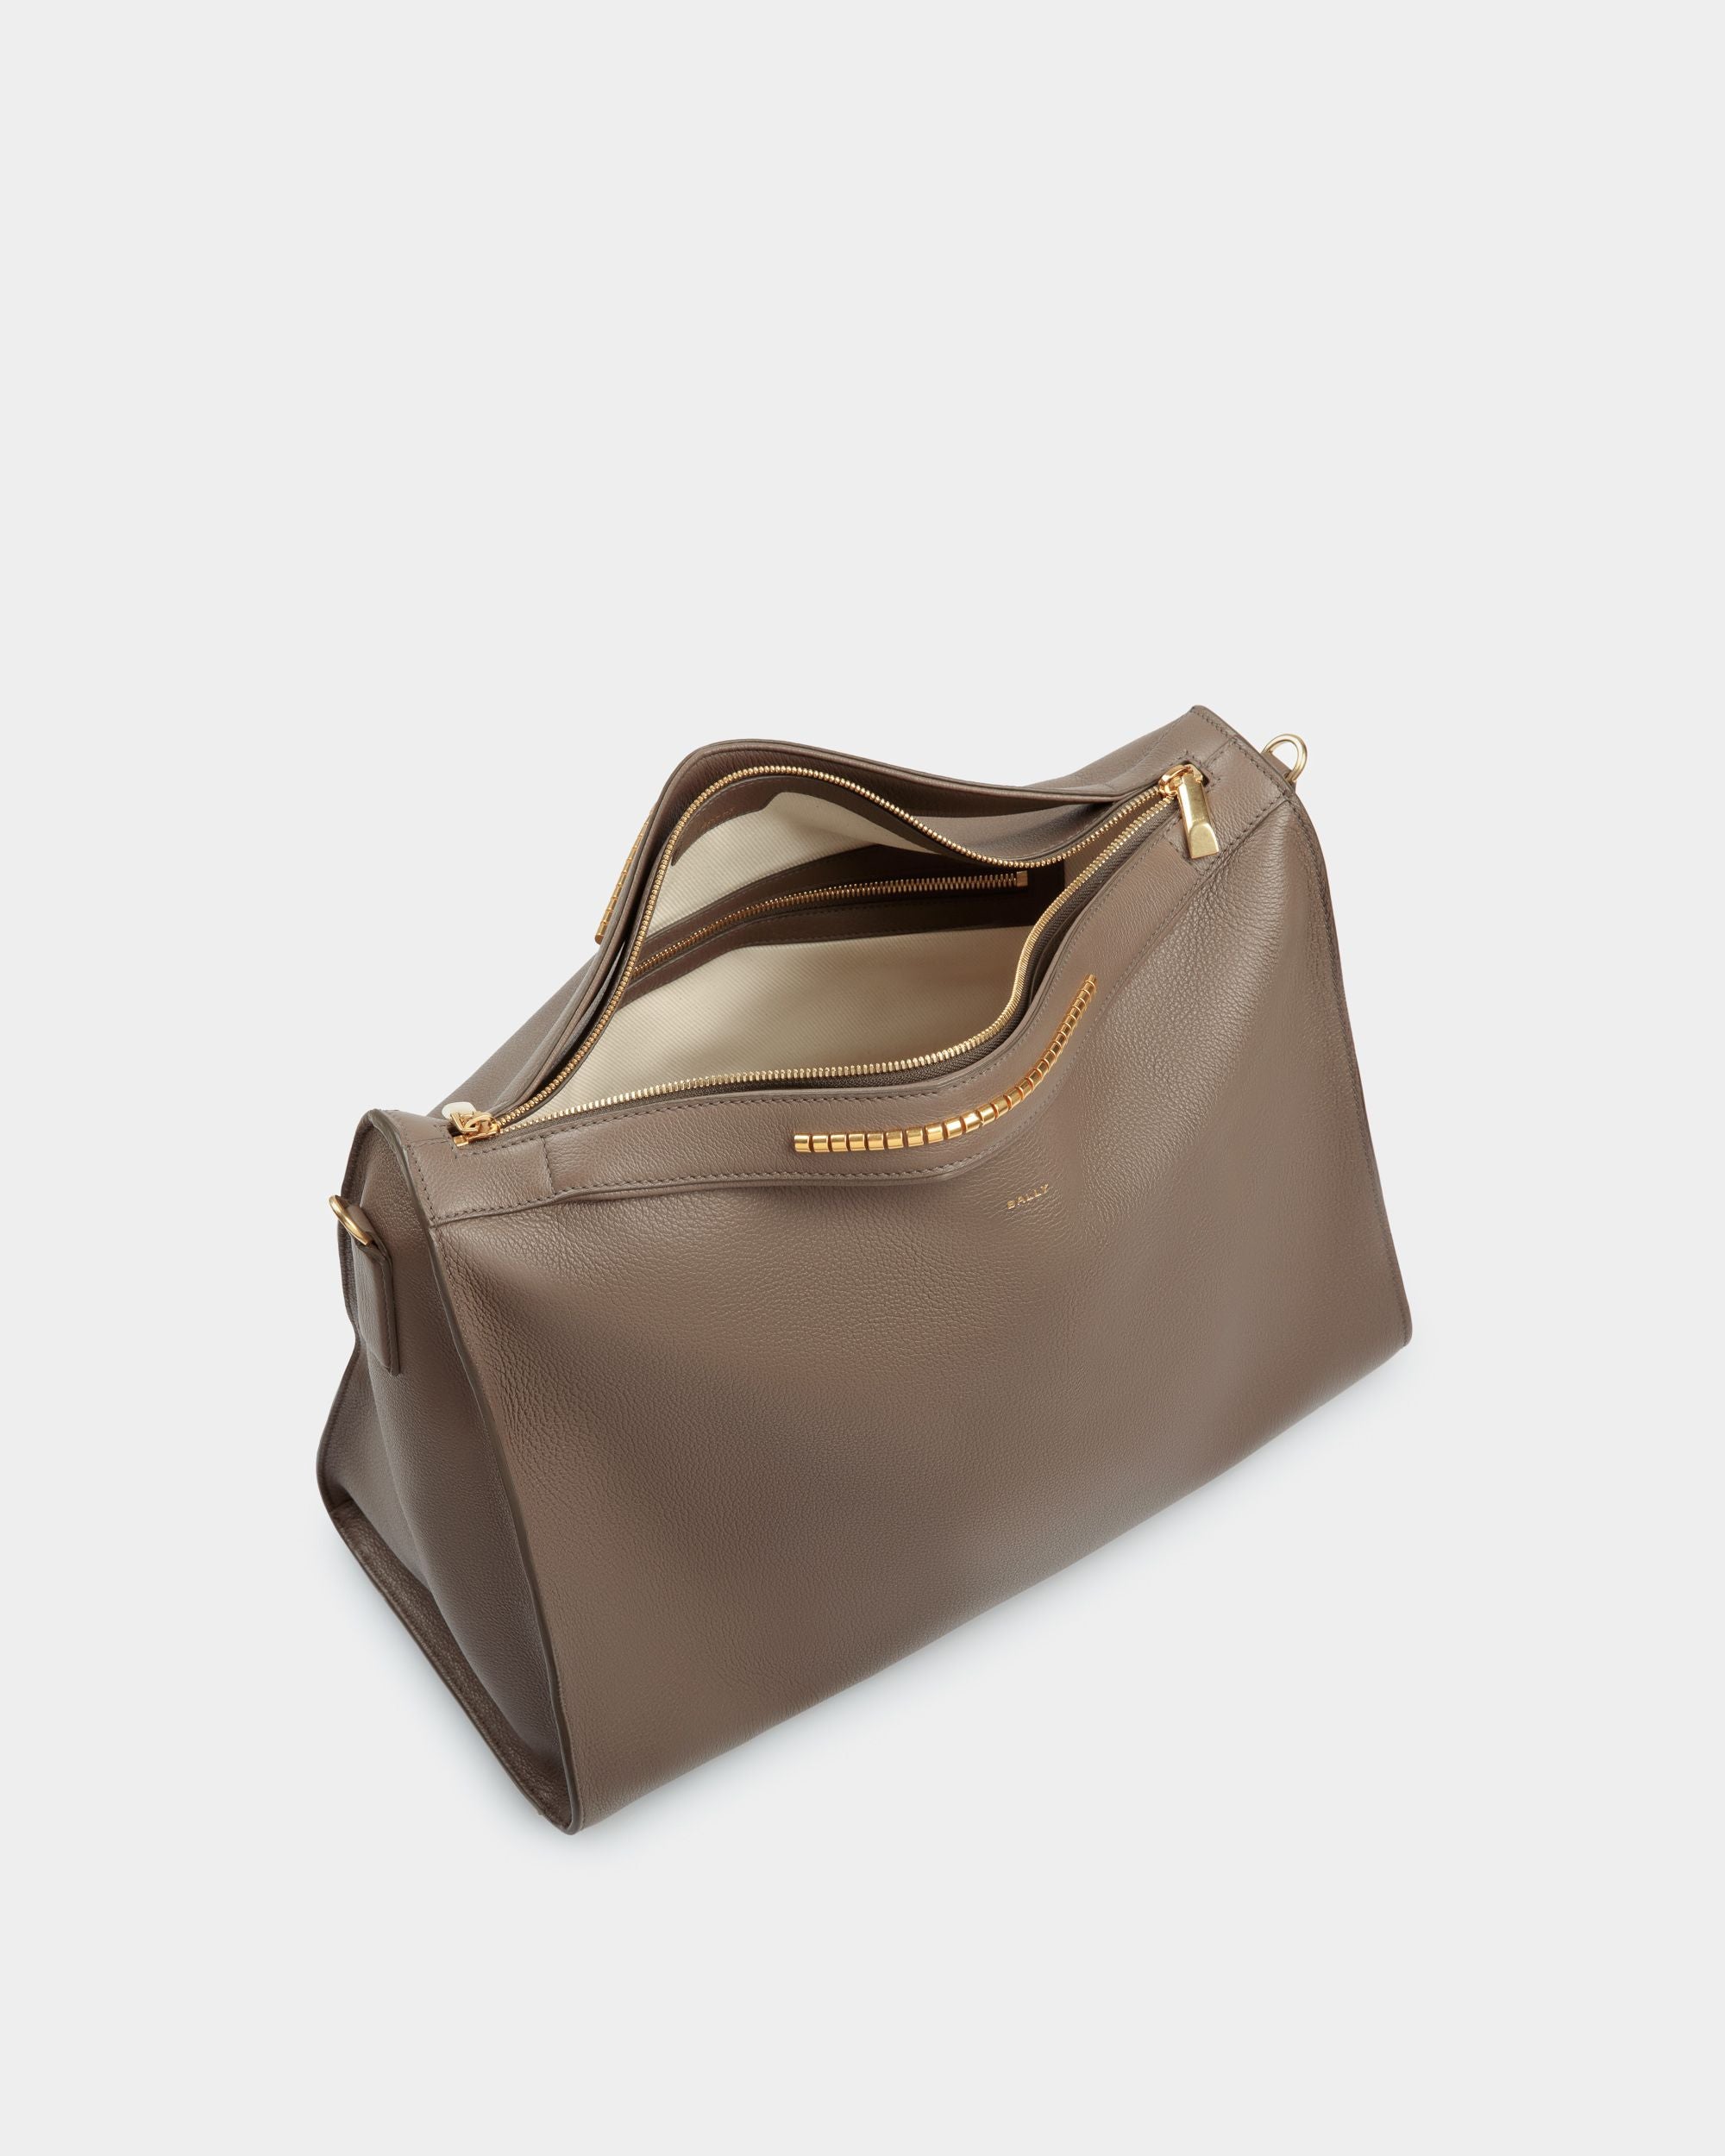 Arkle Soft Tote Bag | Men's Tote Bag |Grey Leather | Bally | Still Life Open / Inside